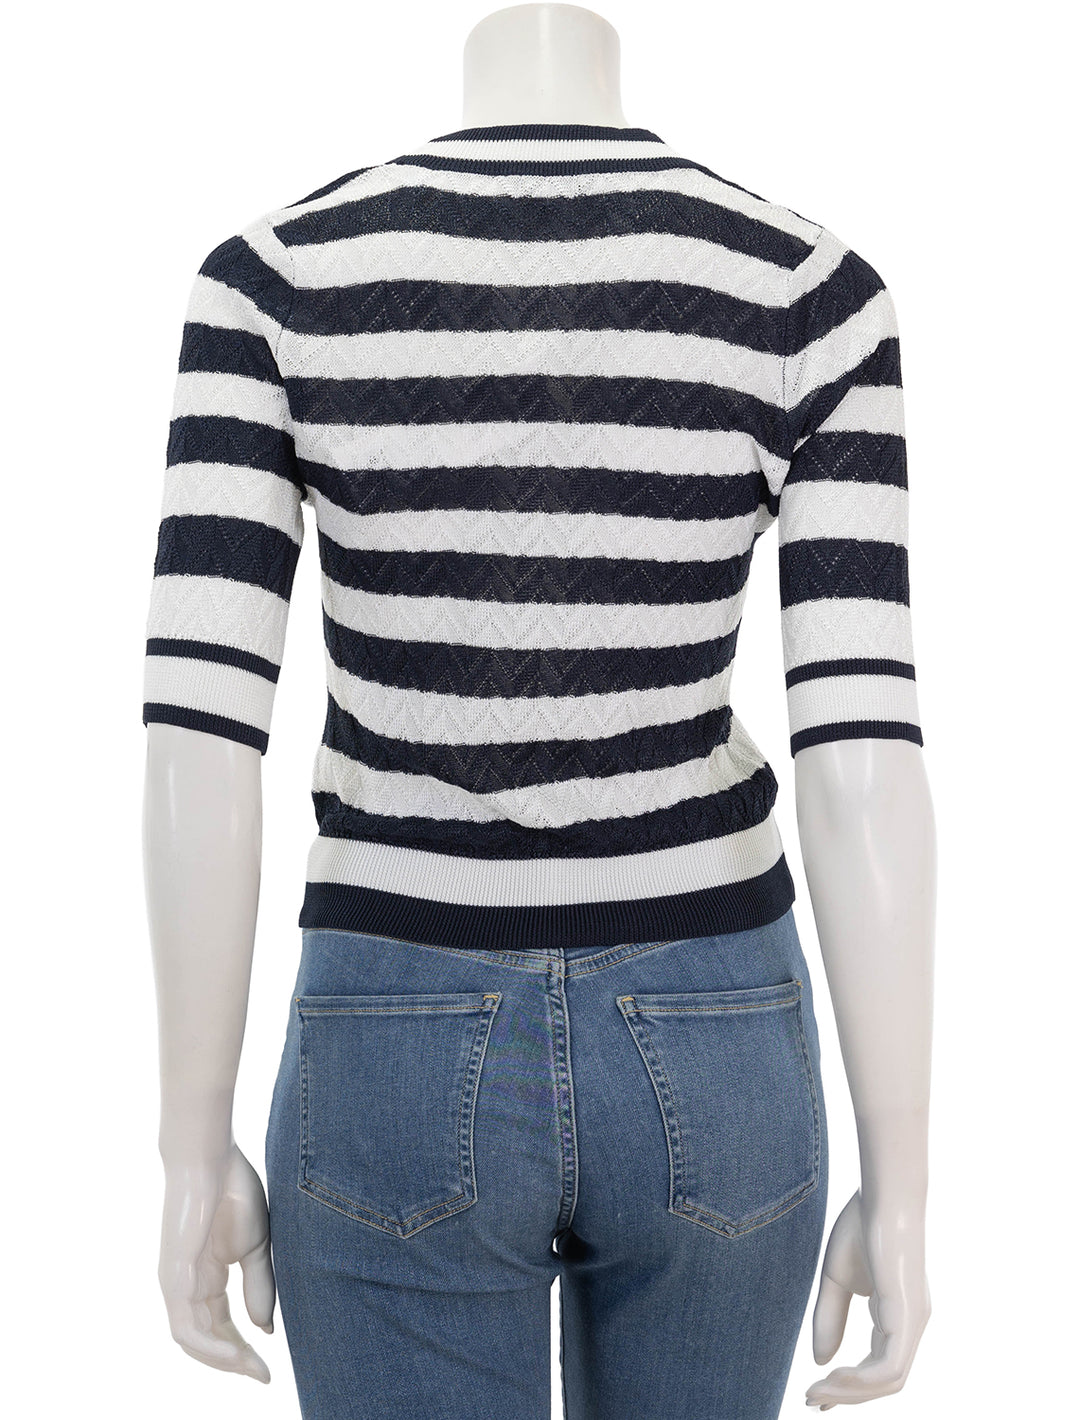 back view of lisbeth knit top in white and navy stripe